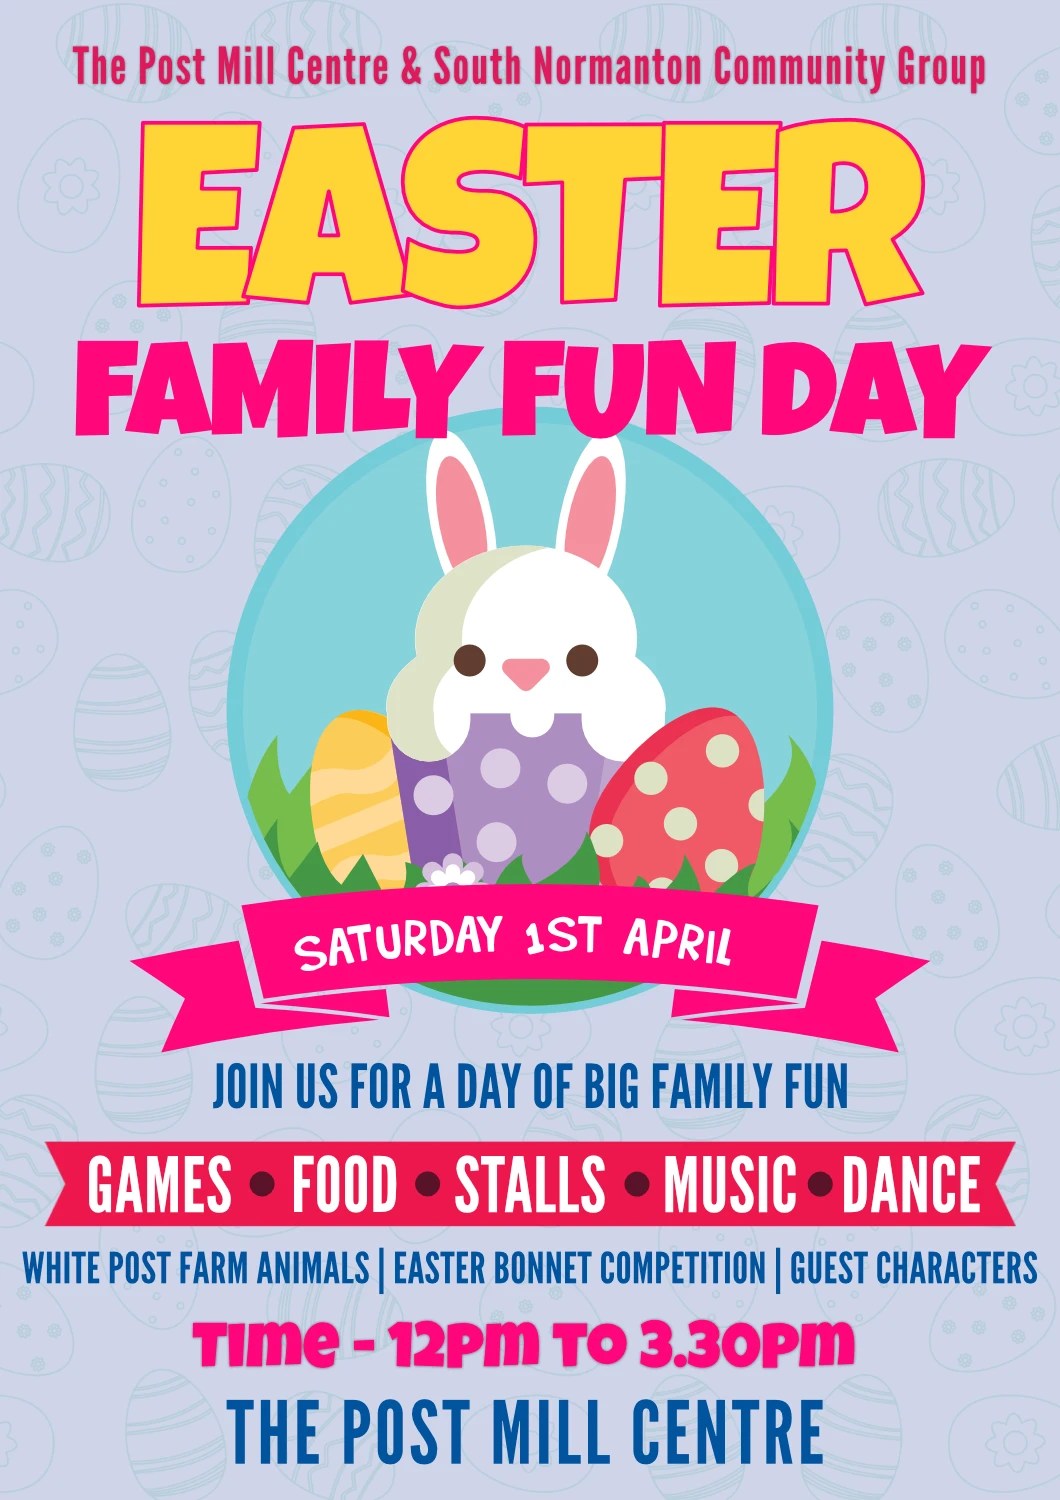 Easter Family Fun Day at the Post Mill Centre in South Normanton on April 1, 2023